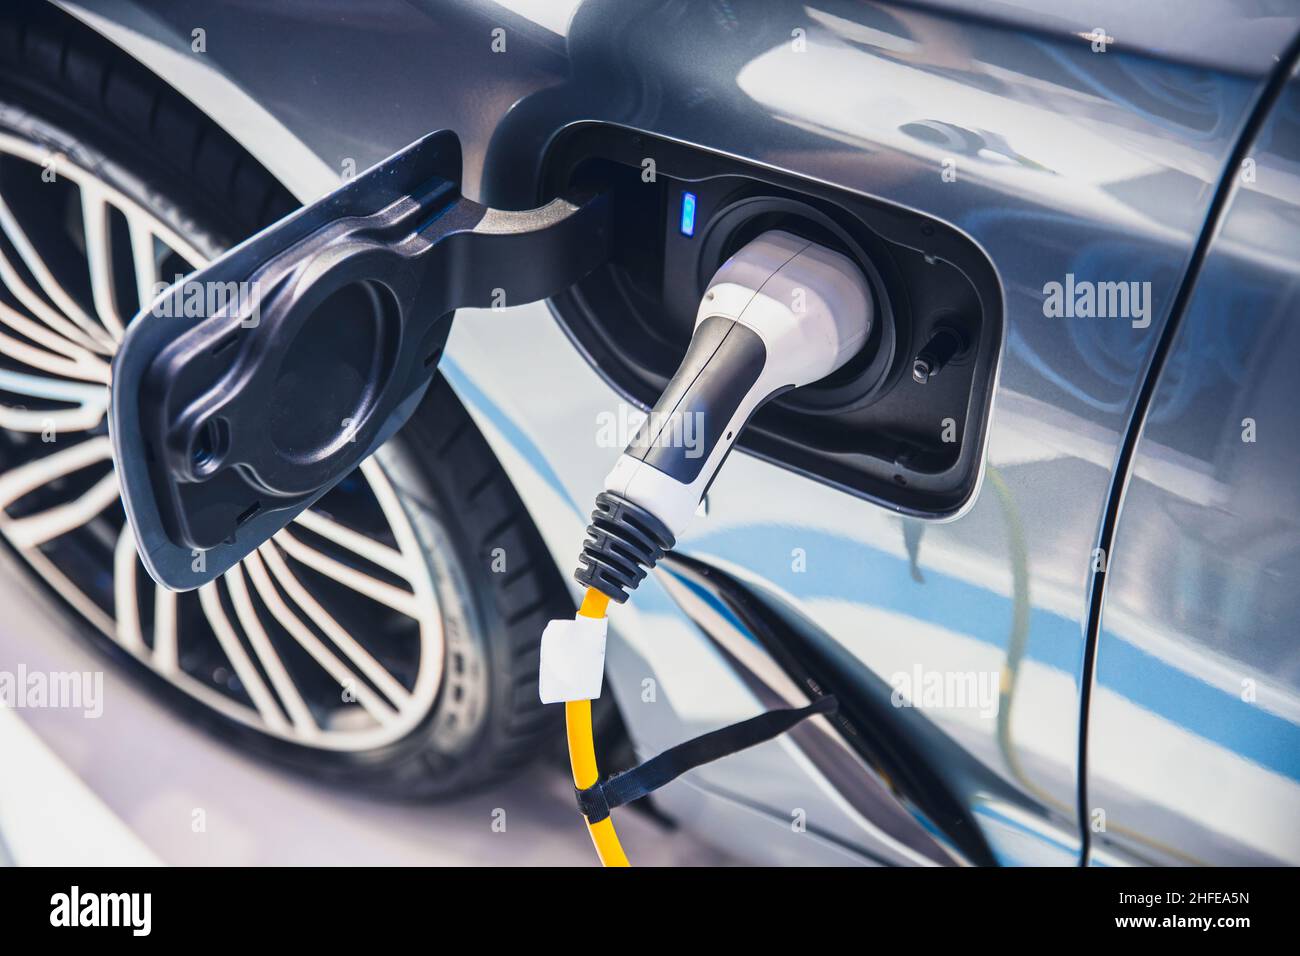 charging EV car electric vehicle clean energy for driving future Stock Photo